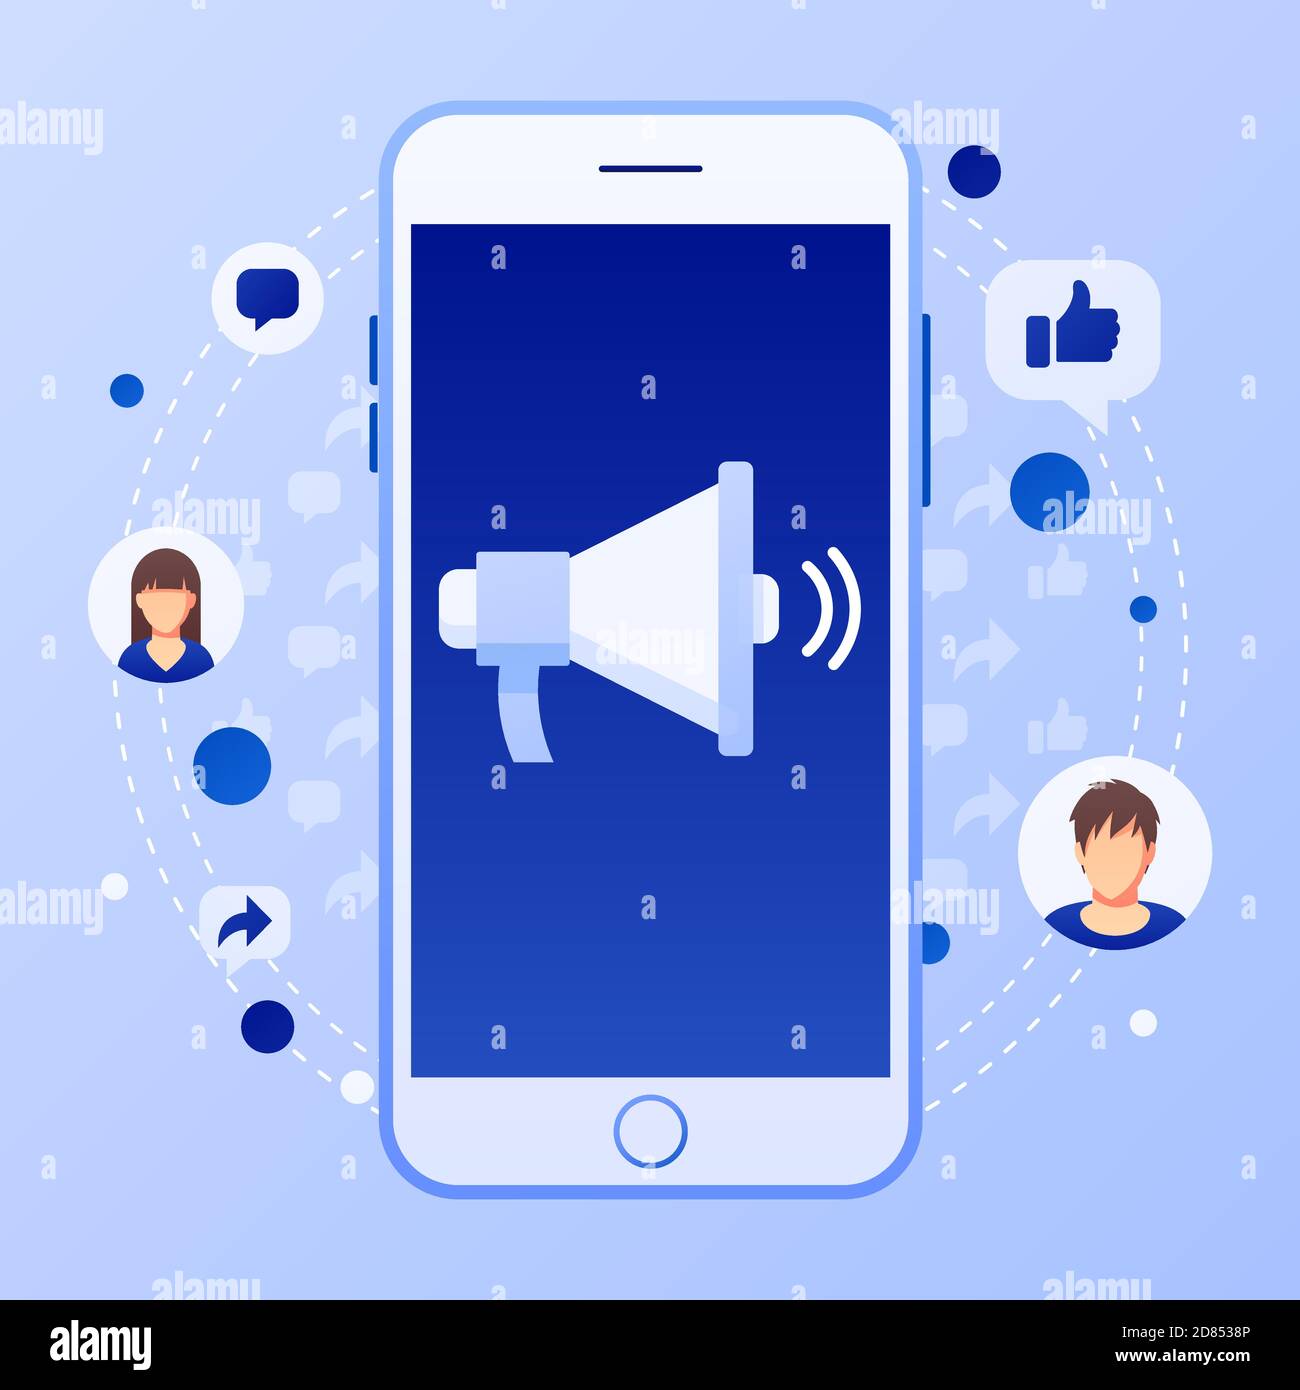 Social media marketing concept with megaphone. Public relations advertising. Flat style design with gradient. Modern vector. Stock Vector